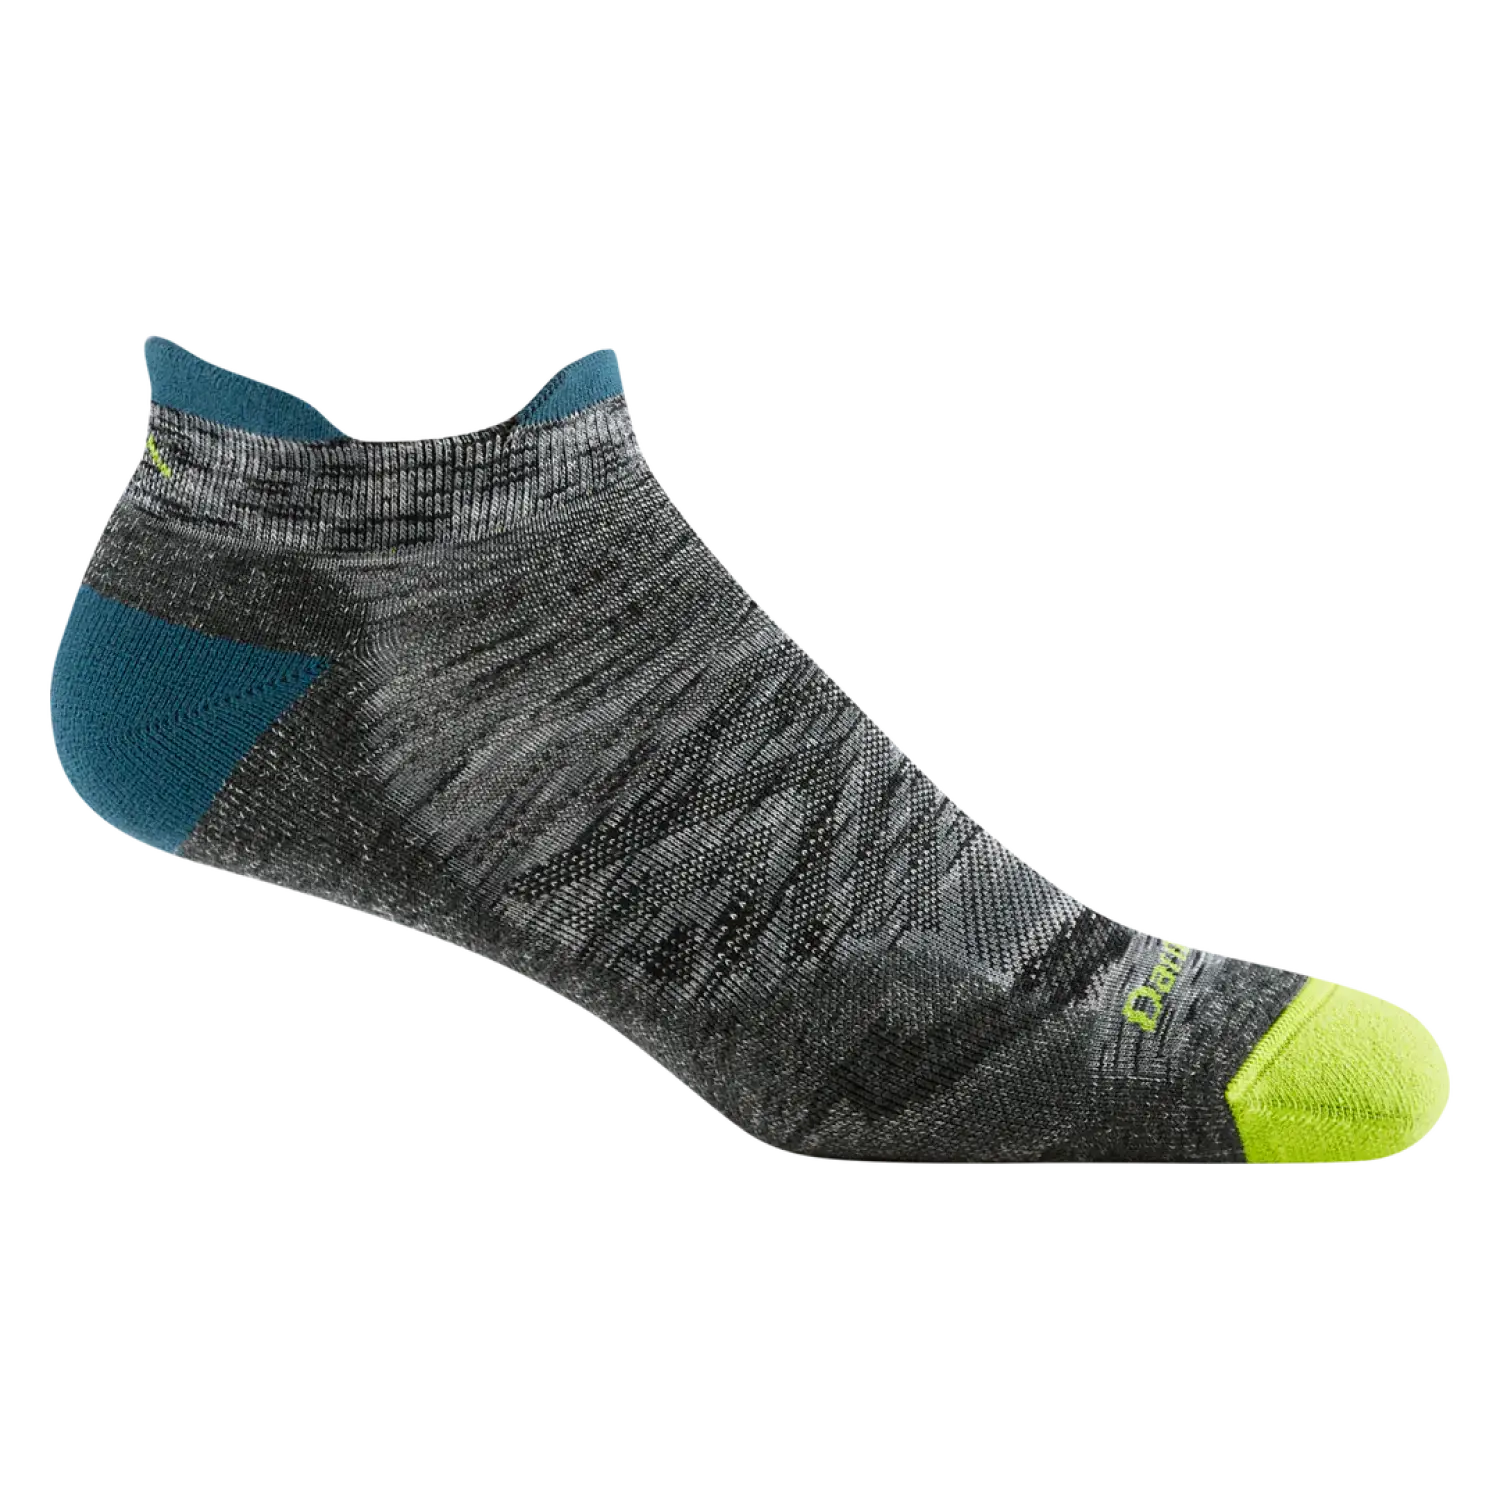 Darn Tough Men's Run No Show Tab Ultra-Lightweight Running Sock shown in the Comet color option.